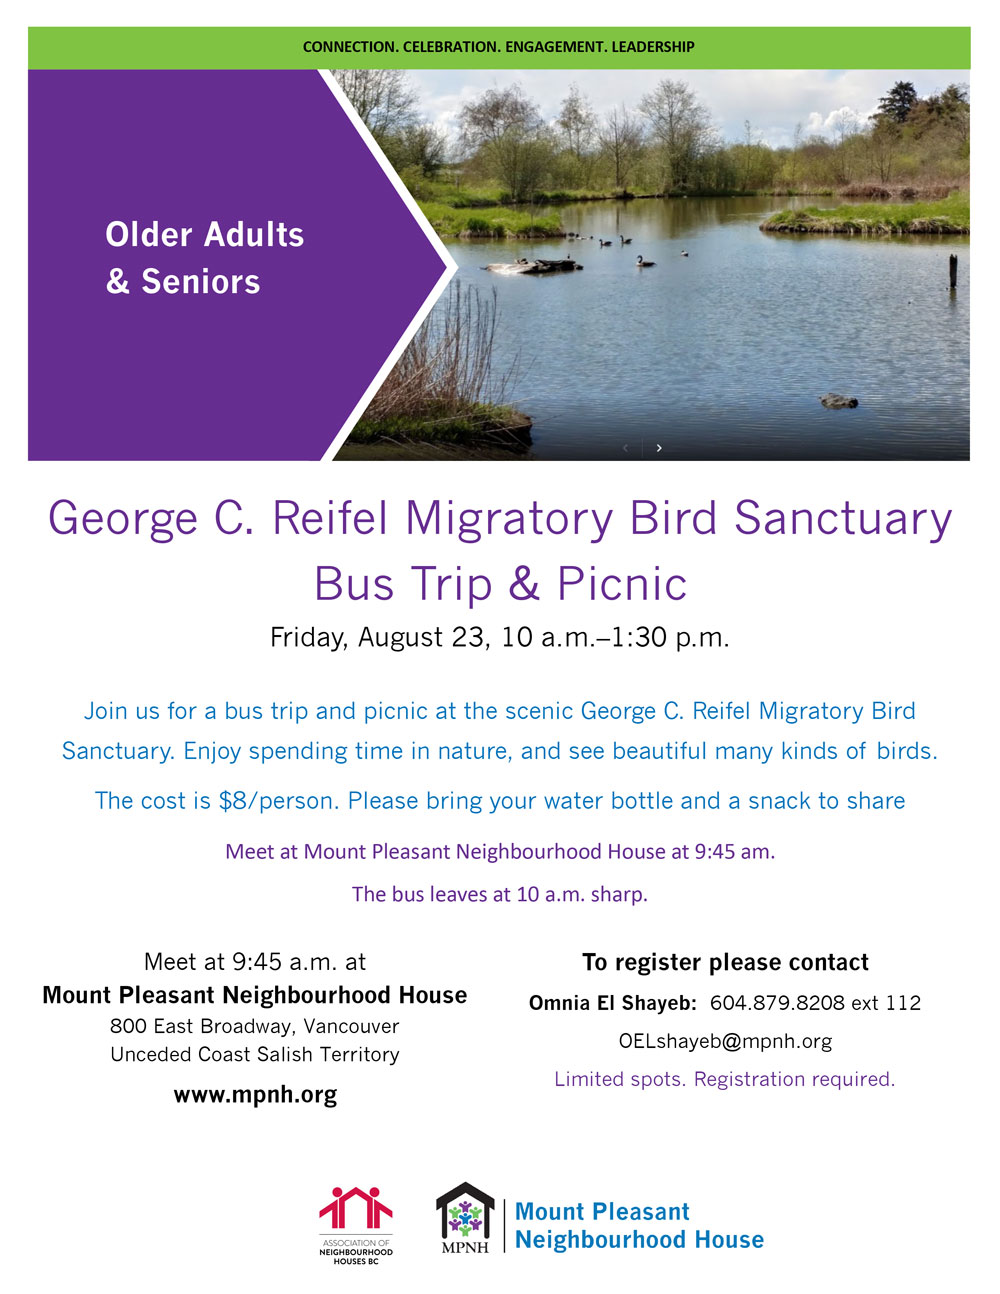 An image of the event poster with details, featuring a scenic image of birds swimming in a pond surrounded by greenery.